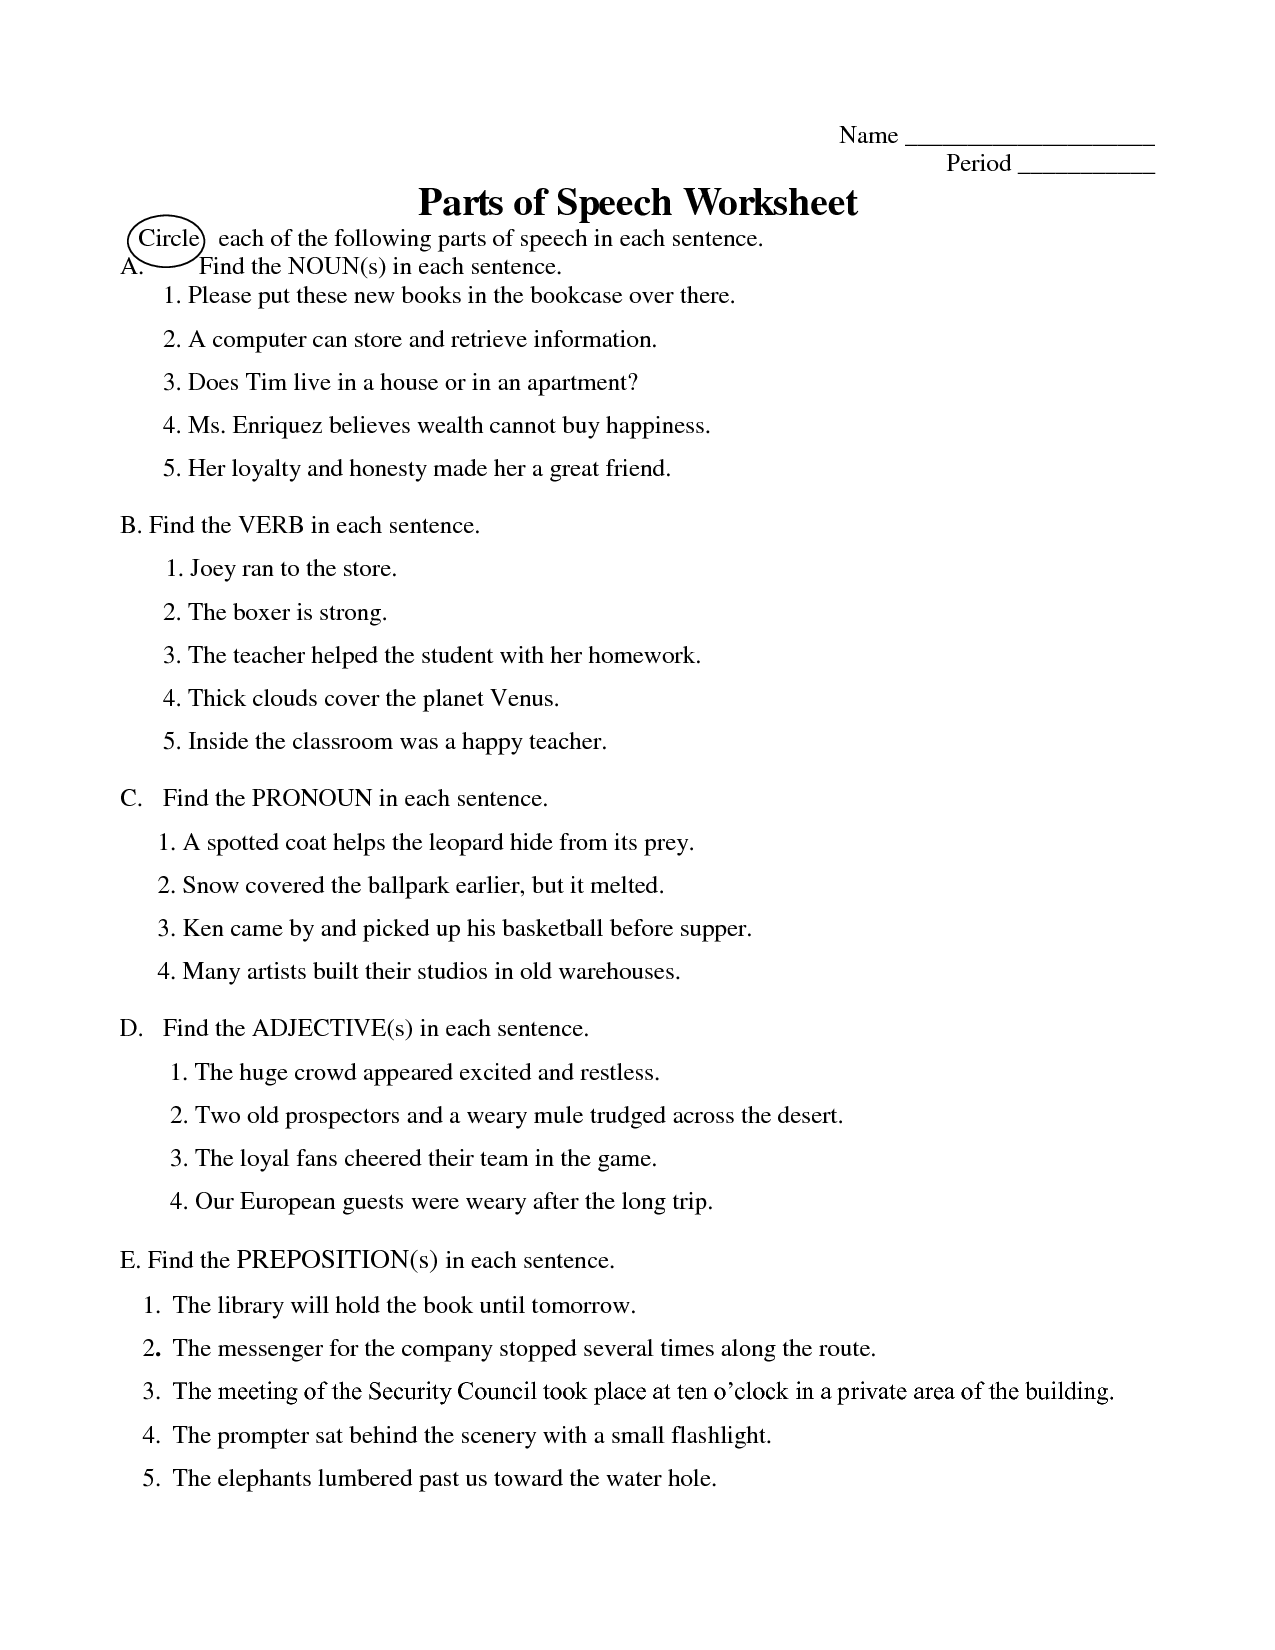 free-printable-parts-of-speech-worksheets-printable-templates